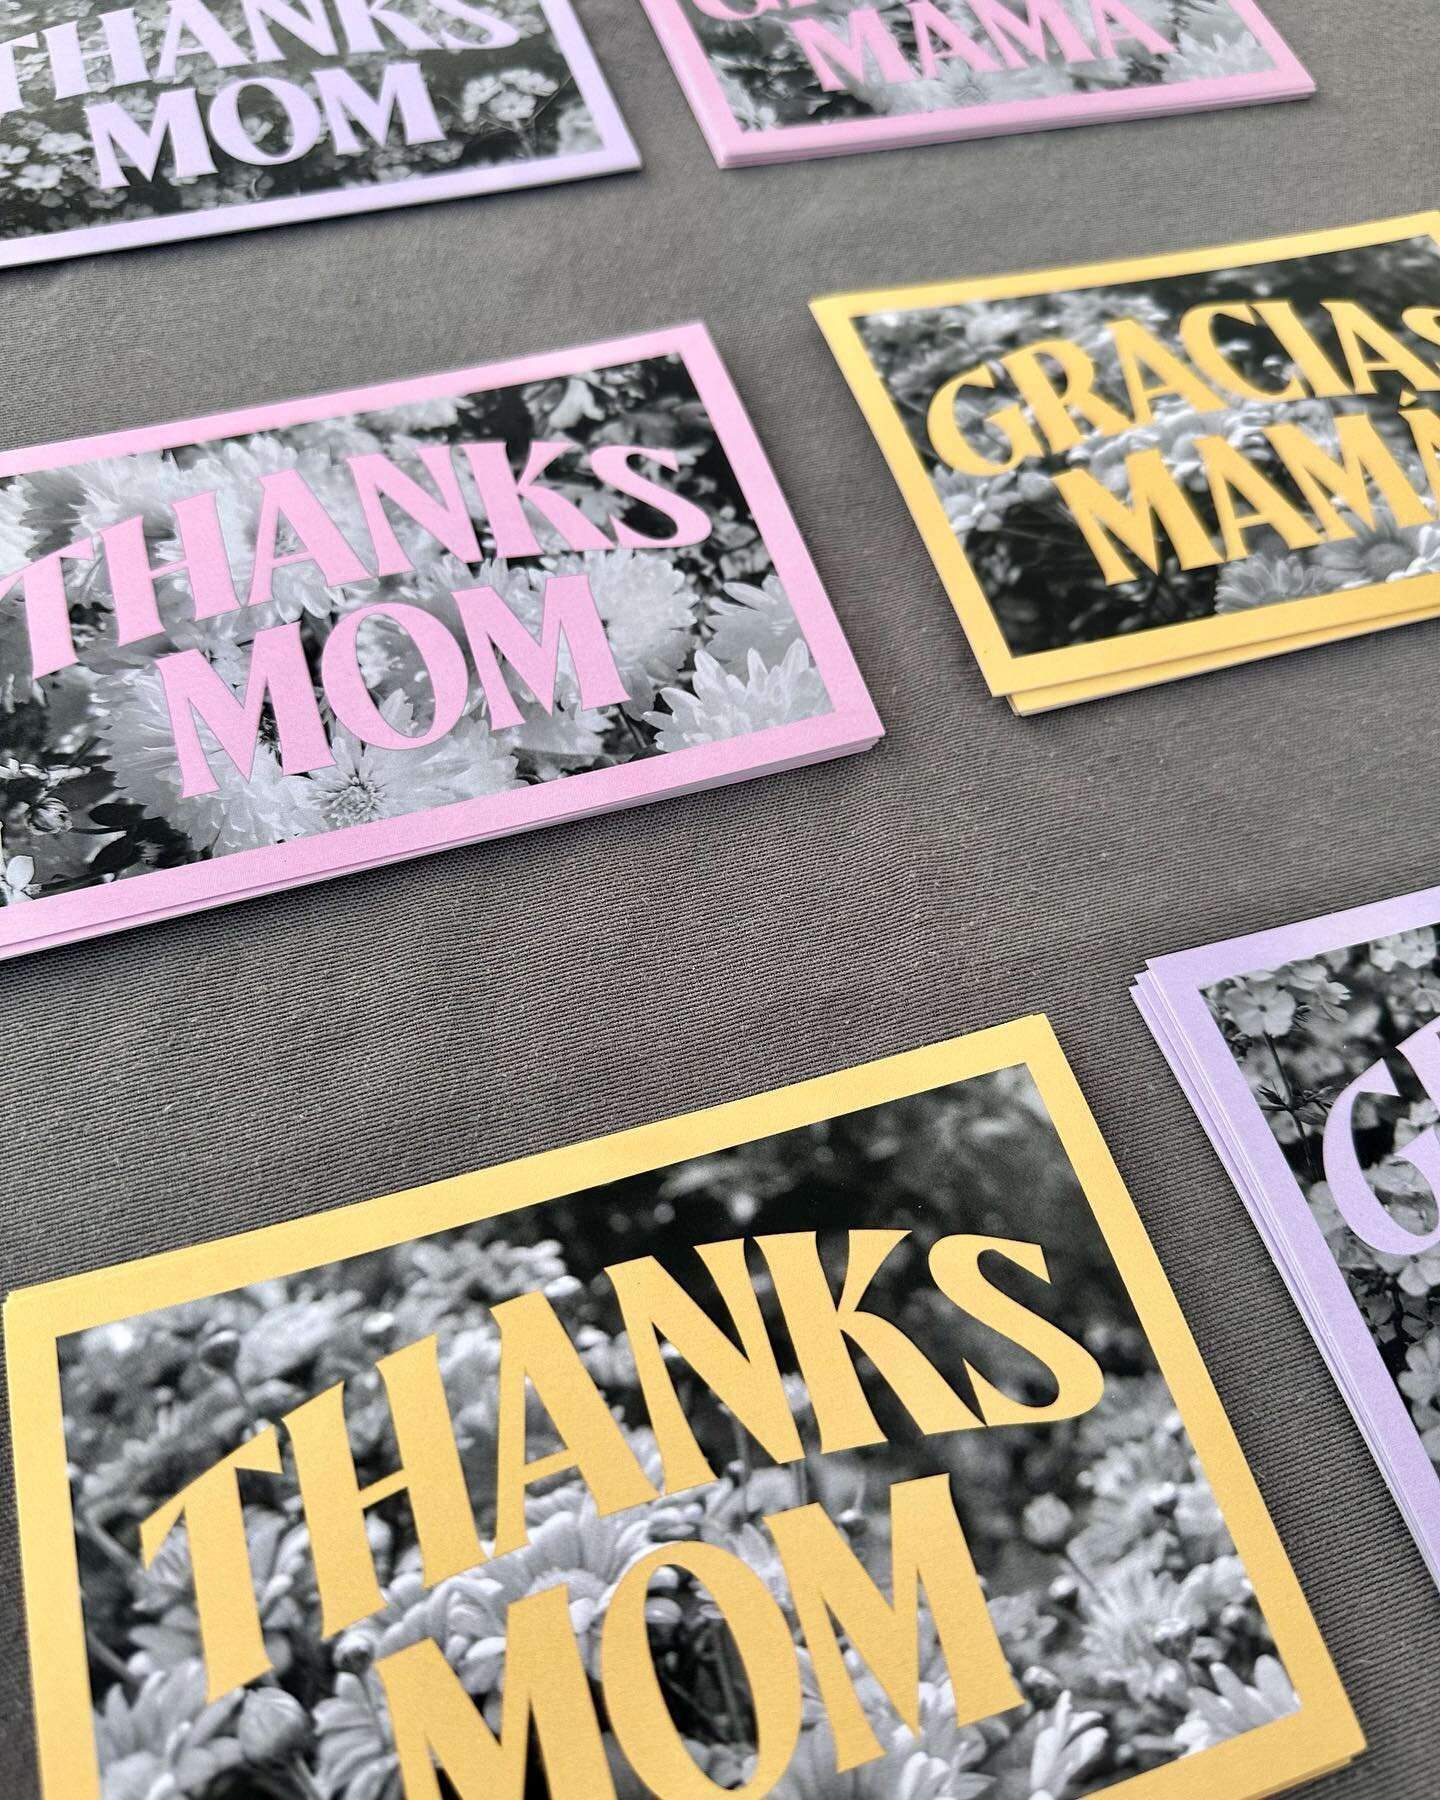 Spread love and appreciation this Mother&rsquo;s Day with our free post cards!! ❤️ We&rsquo;ll have them at our booth at the farmers markets this weekend and the next. Stop by to pick one up! 

#mothersday #momlove #allmymoms #organic #vegan #farmers